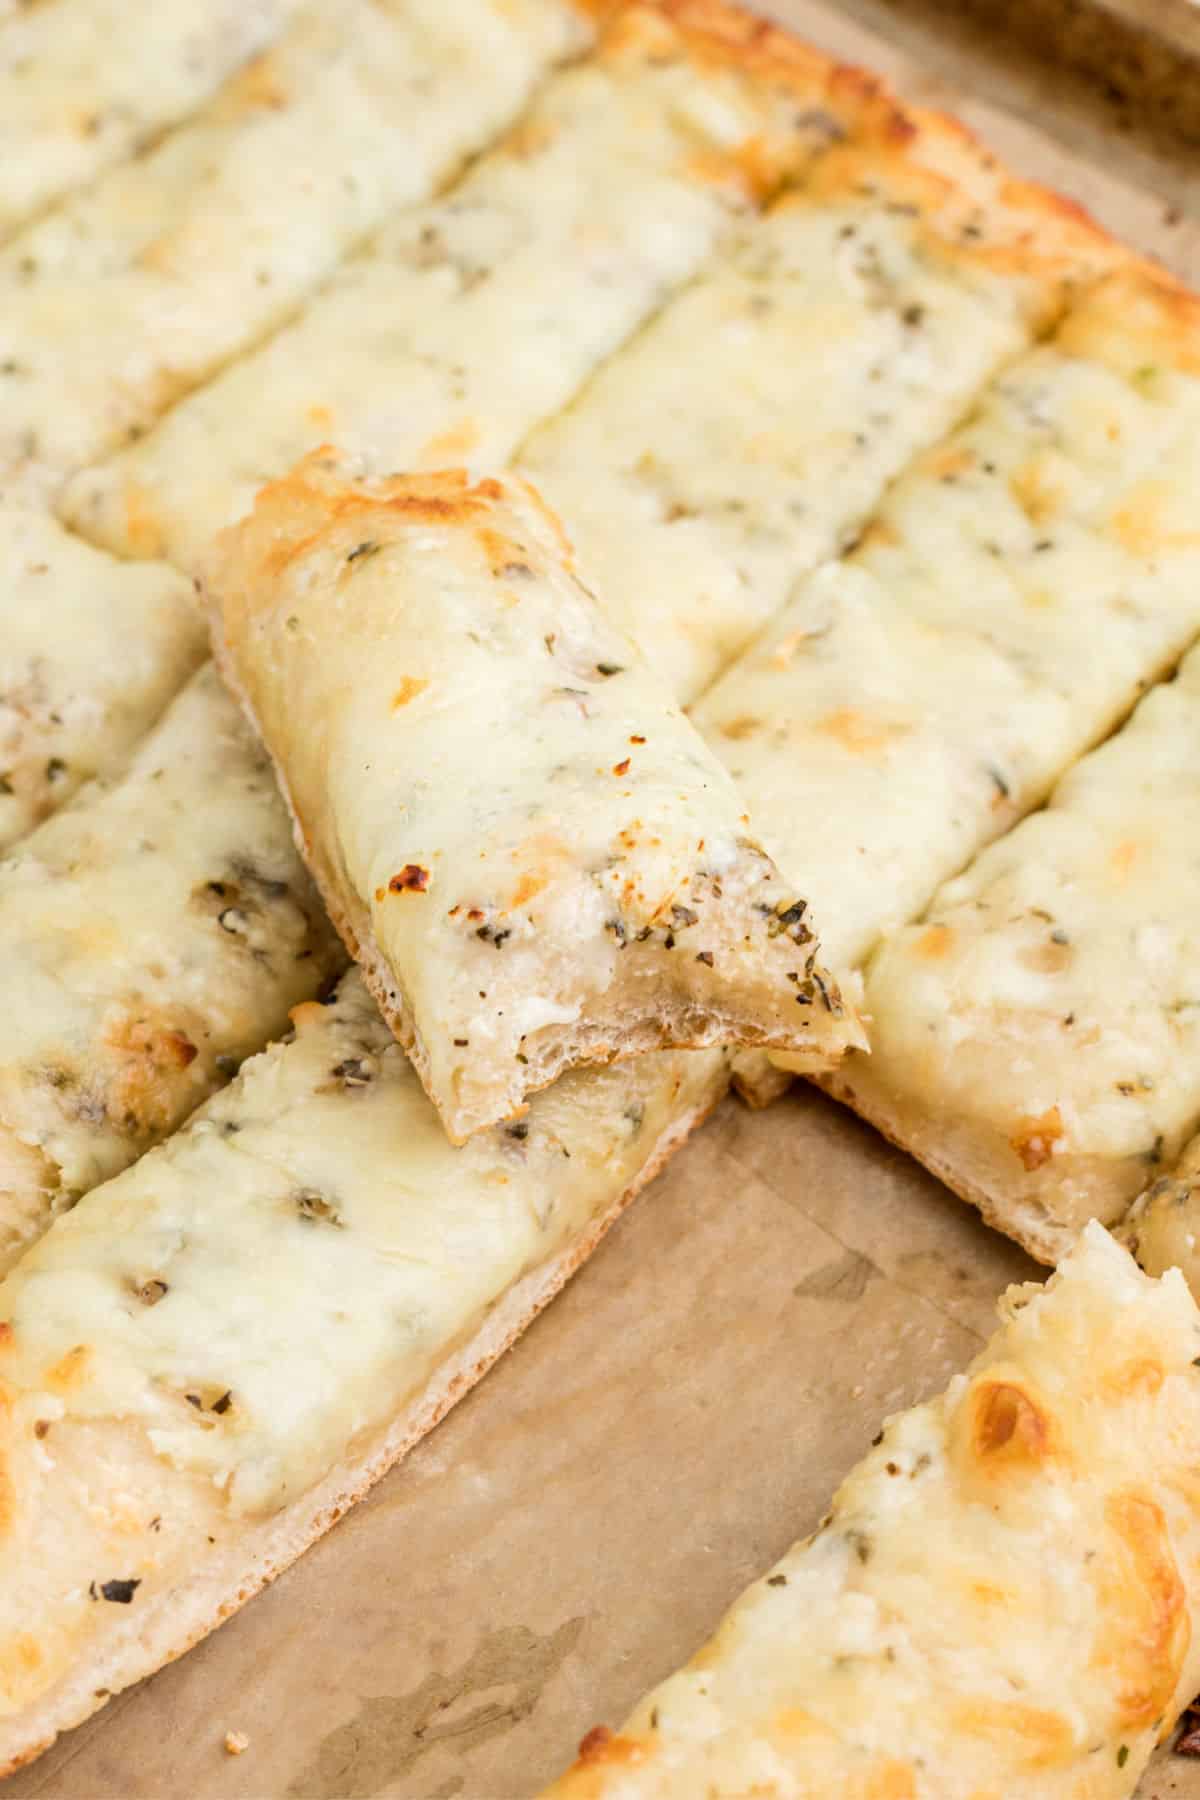 Close up of some Italian Cheese bread with a bite taken out.